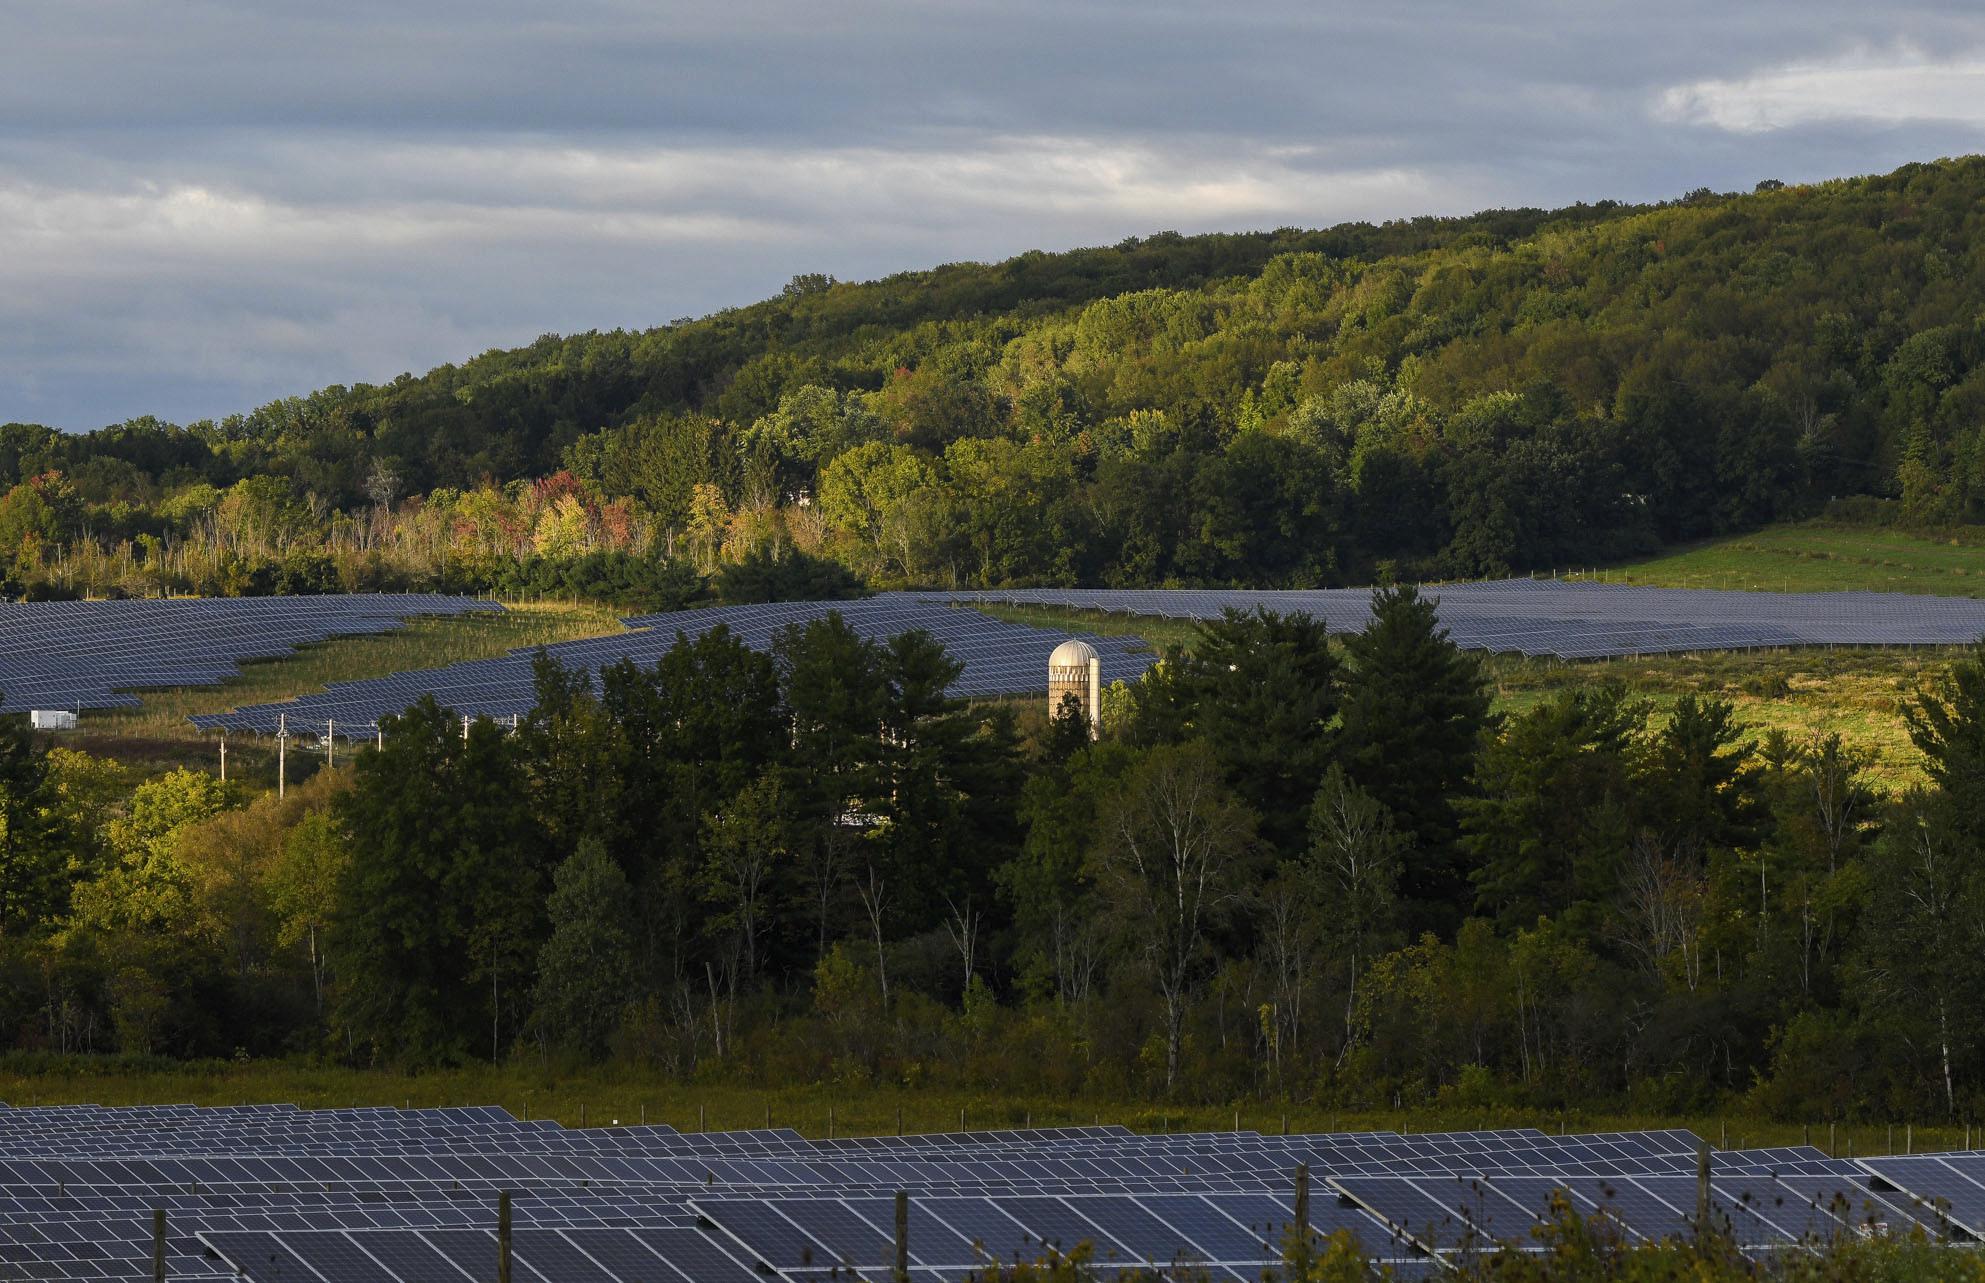 Solar farms surround trees at Cornell University in Ithaca, N.Y., Friday, Sept. 24, 2021. As panels spread across the landscape, the grounds around them can be used for native grasses and flowers that attract pollinators such as bees and butterflies. Some solar farms are being used to graze sheep. (AP Photo/Heather Ainsworth)